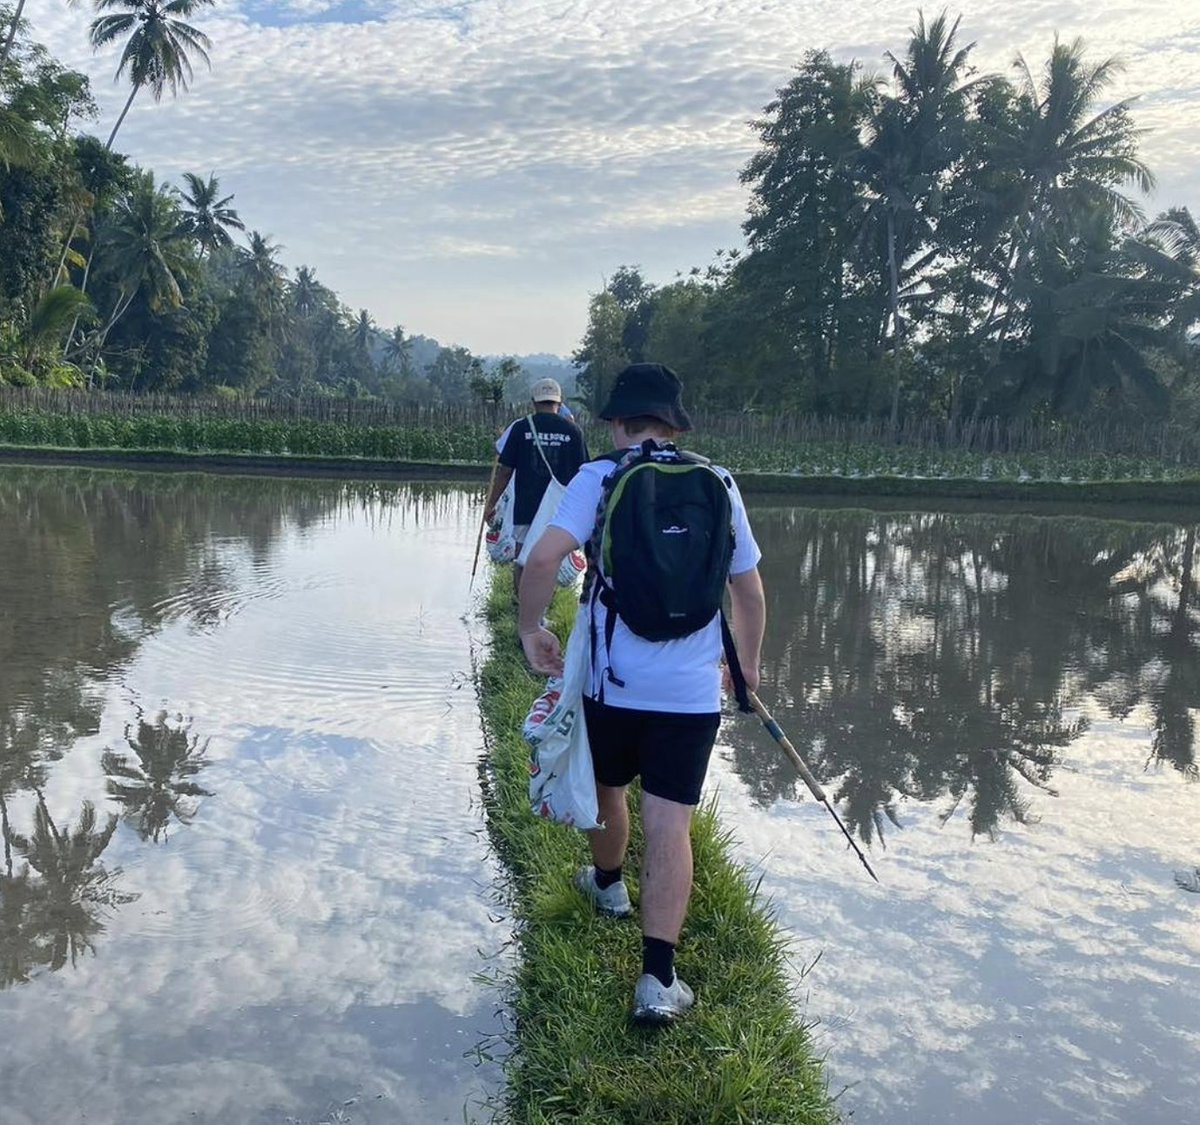 It's #PlasticFreeJuly, a movement to raise awareness about plastic pollution & encourage steps to reduce it. Recently, students from GS #NewZealand went out on a Trash Walk when visiting Bali, collecting trash as they walked through the rice paddies. greenschool.org